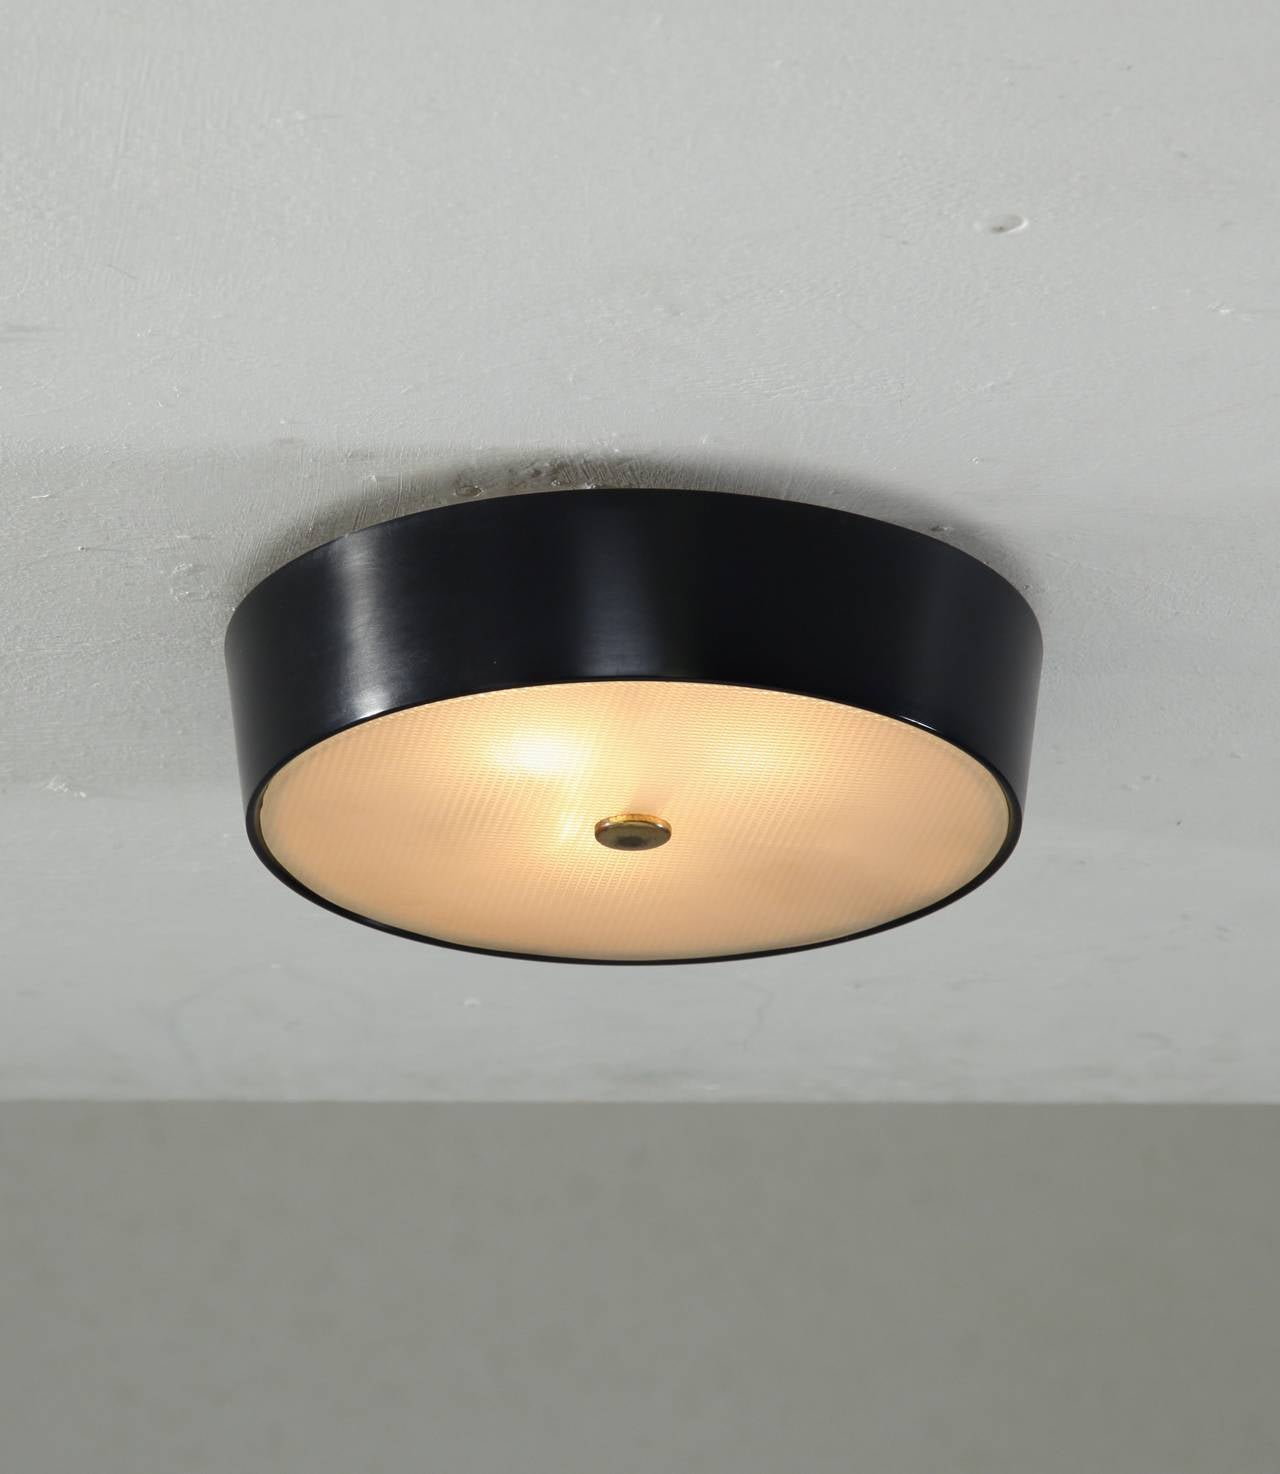 A round Stilnovo flush mount lamp made of black metal outside and white metal inside, with a textured glass diffuser.